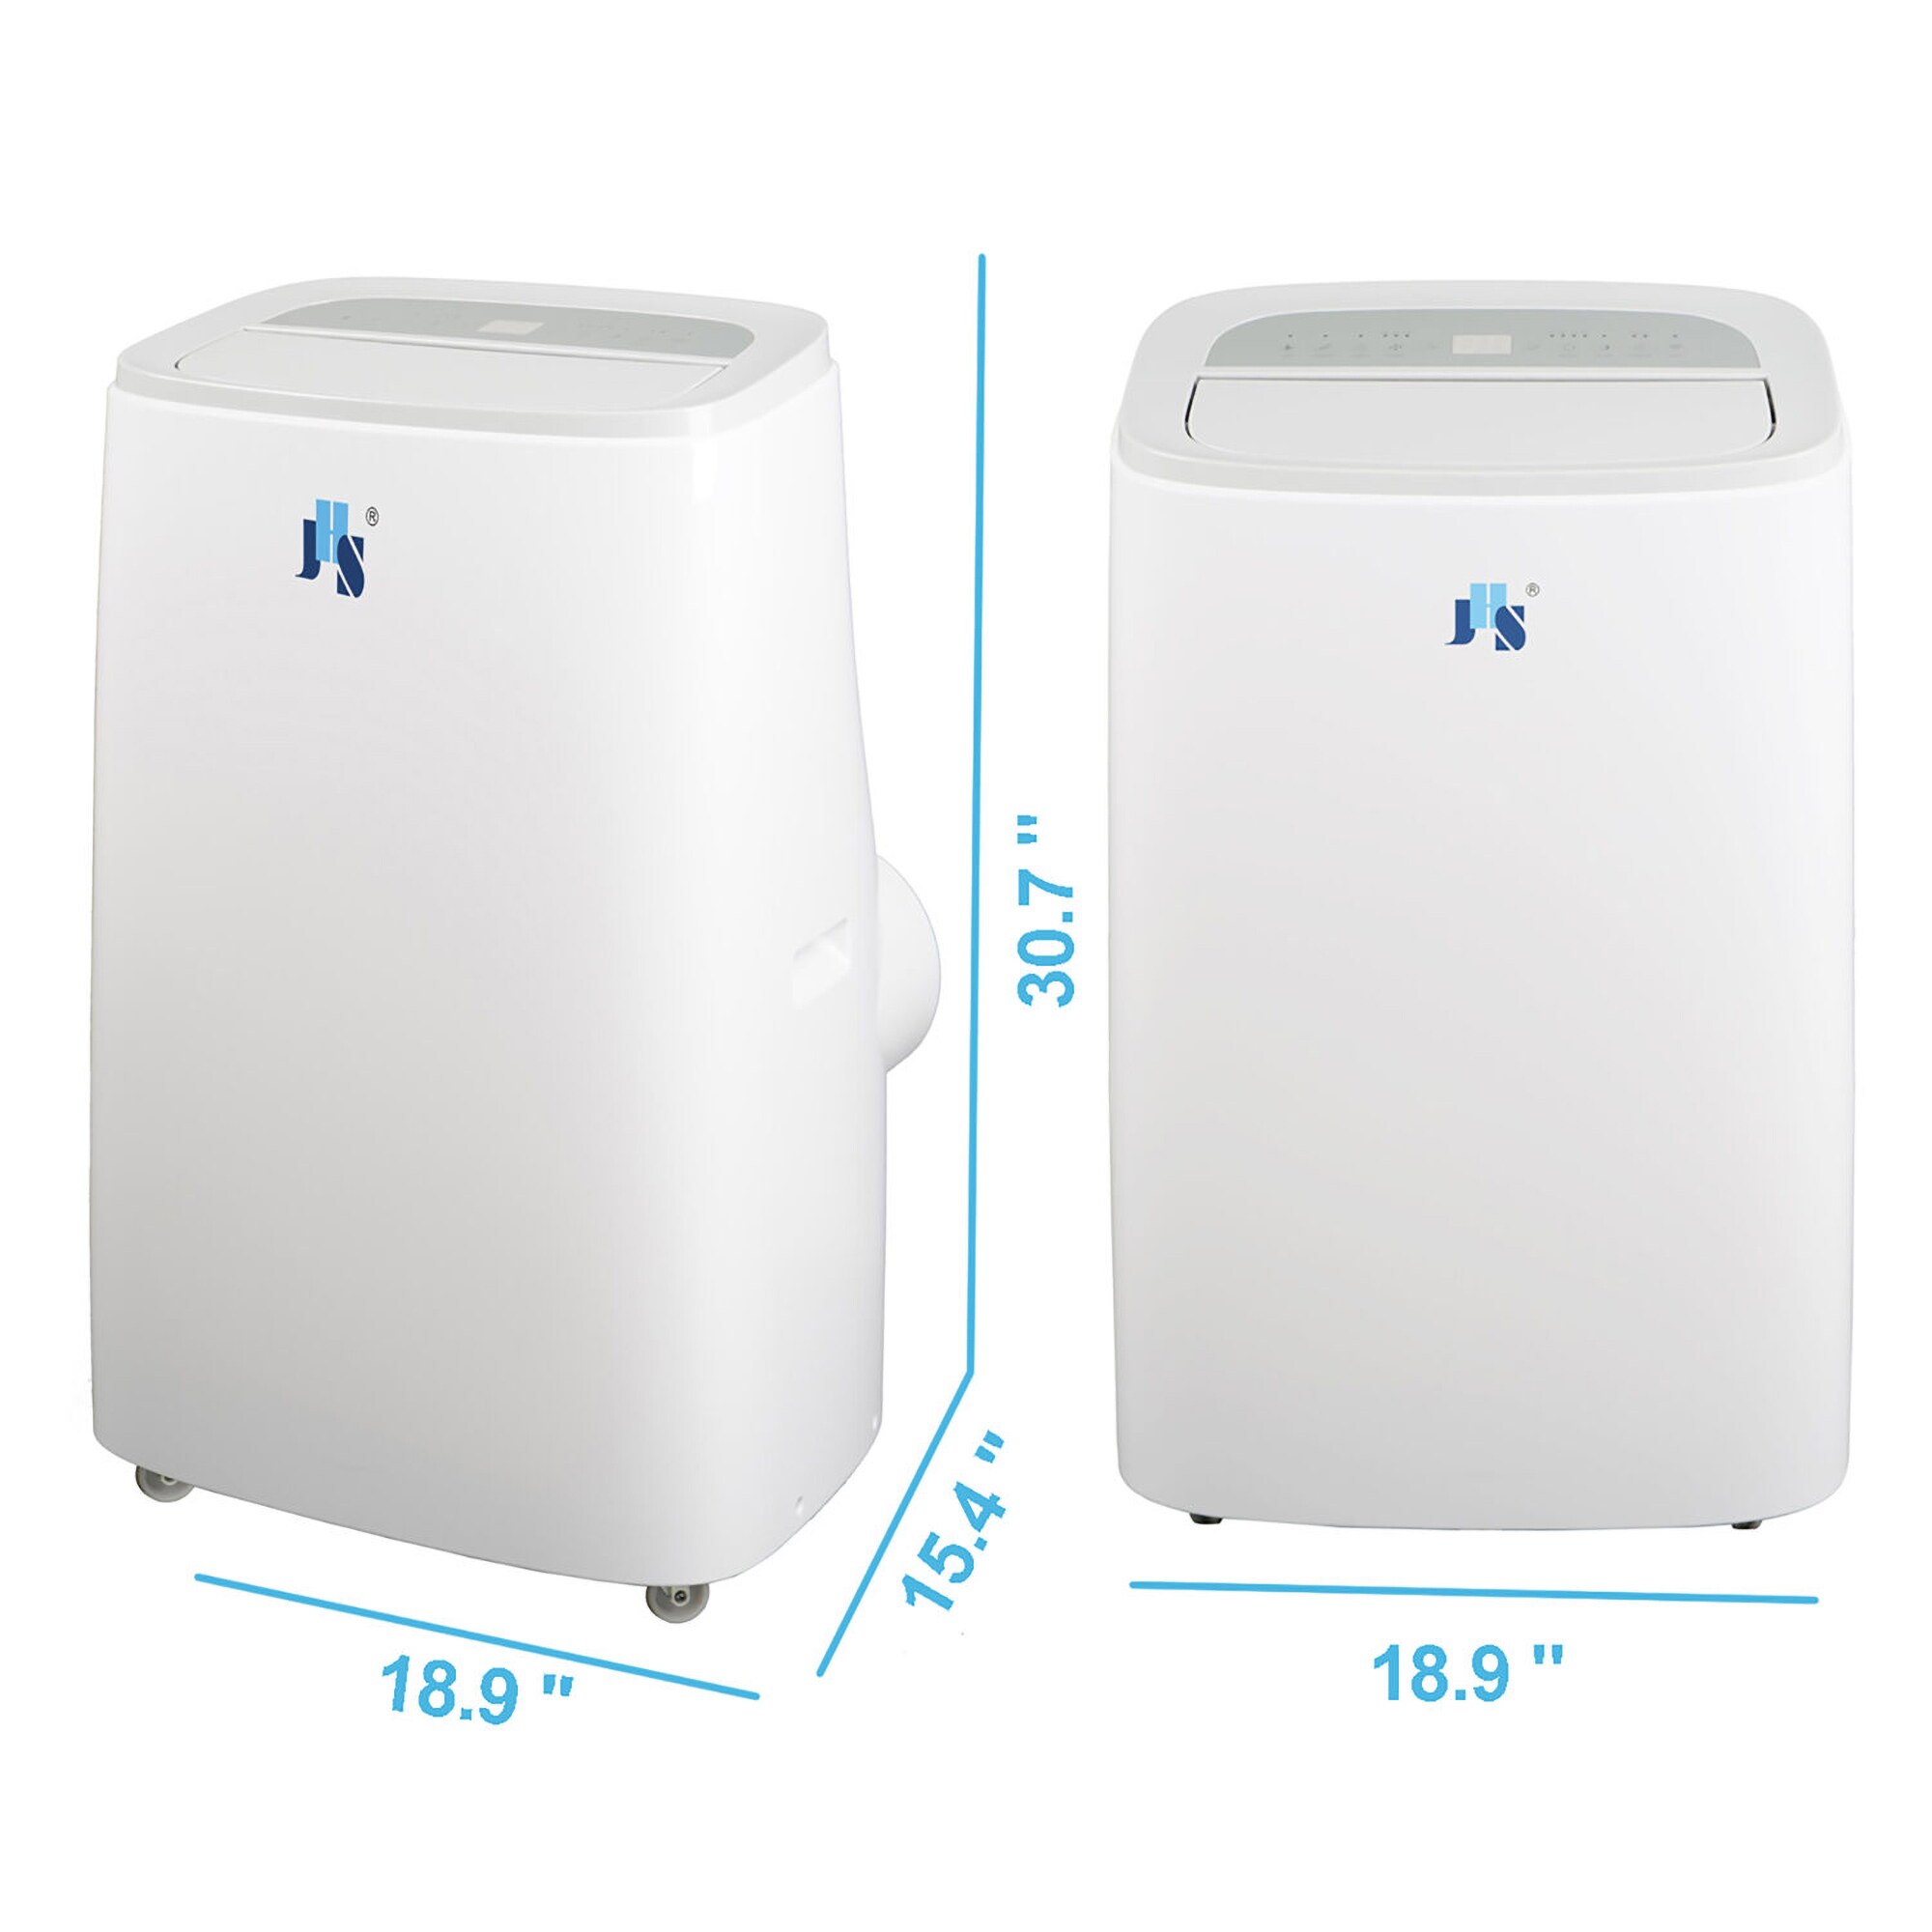 Portable Air Conditioners for sale in West Sacramento, California